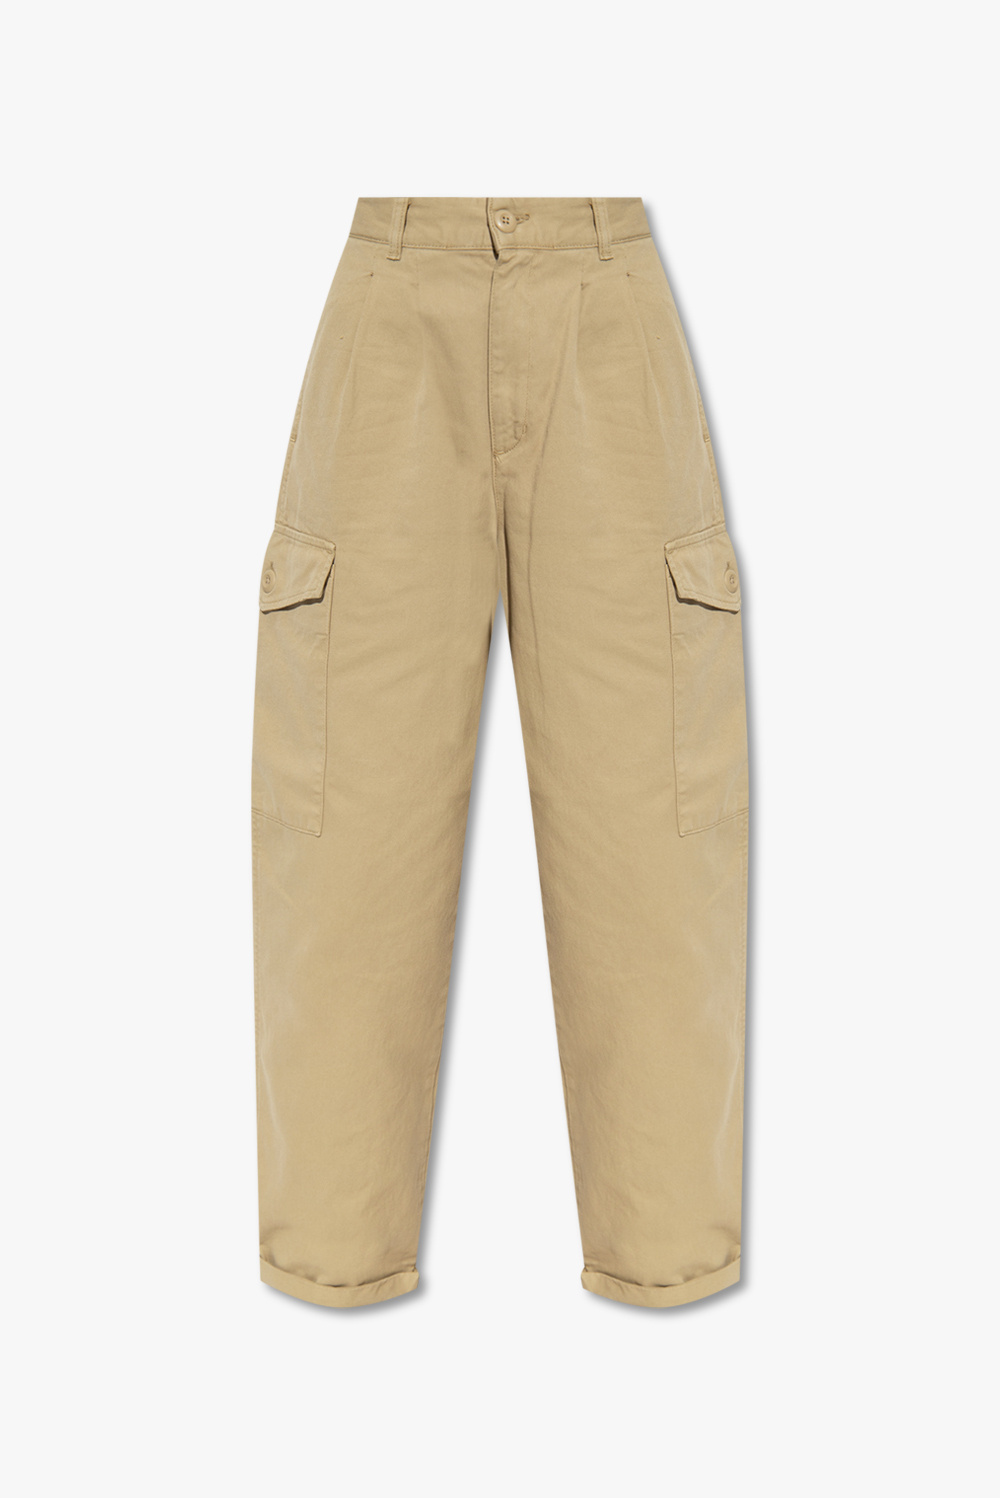 Carhartt Wip Wmns Collins Pant Black - Womens - Casual Pants